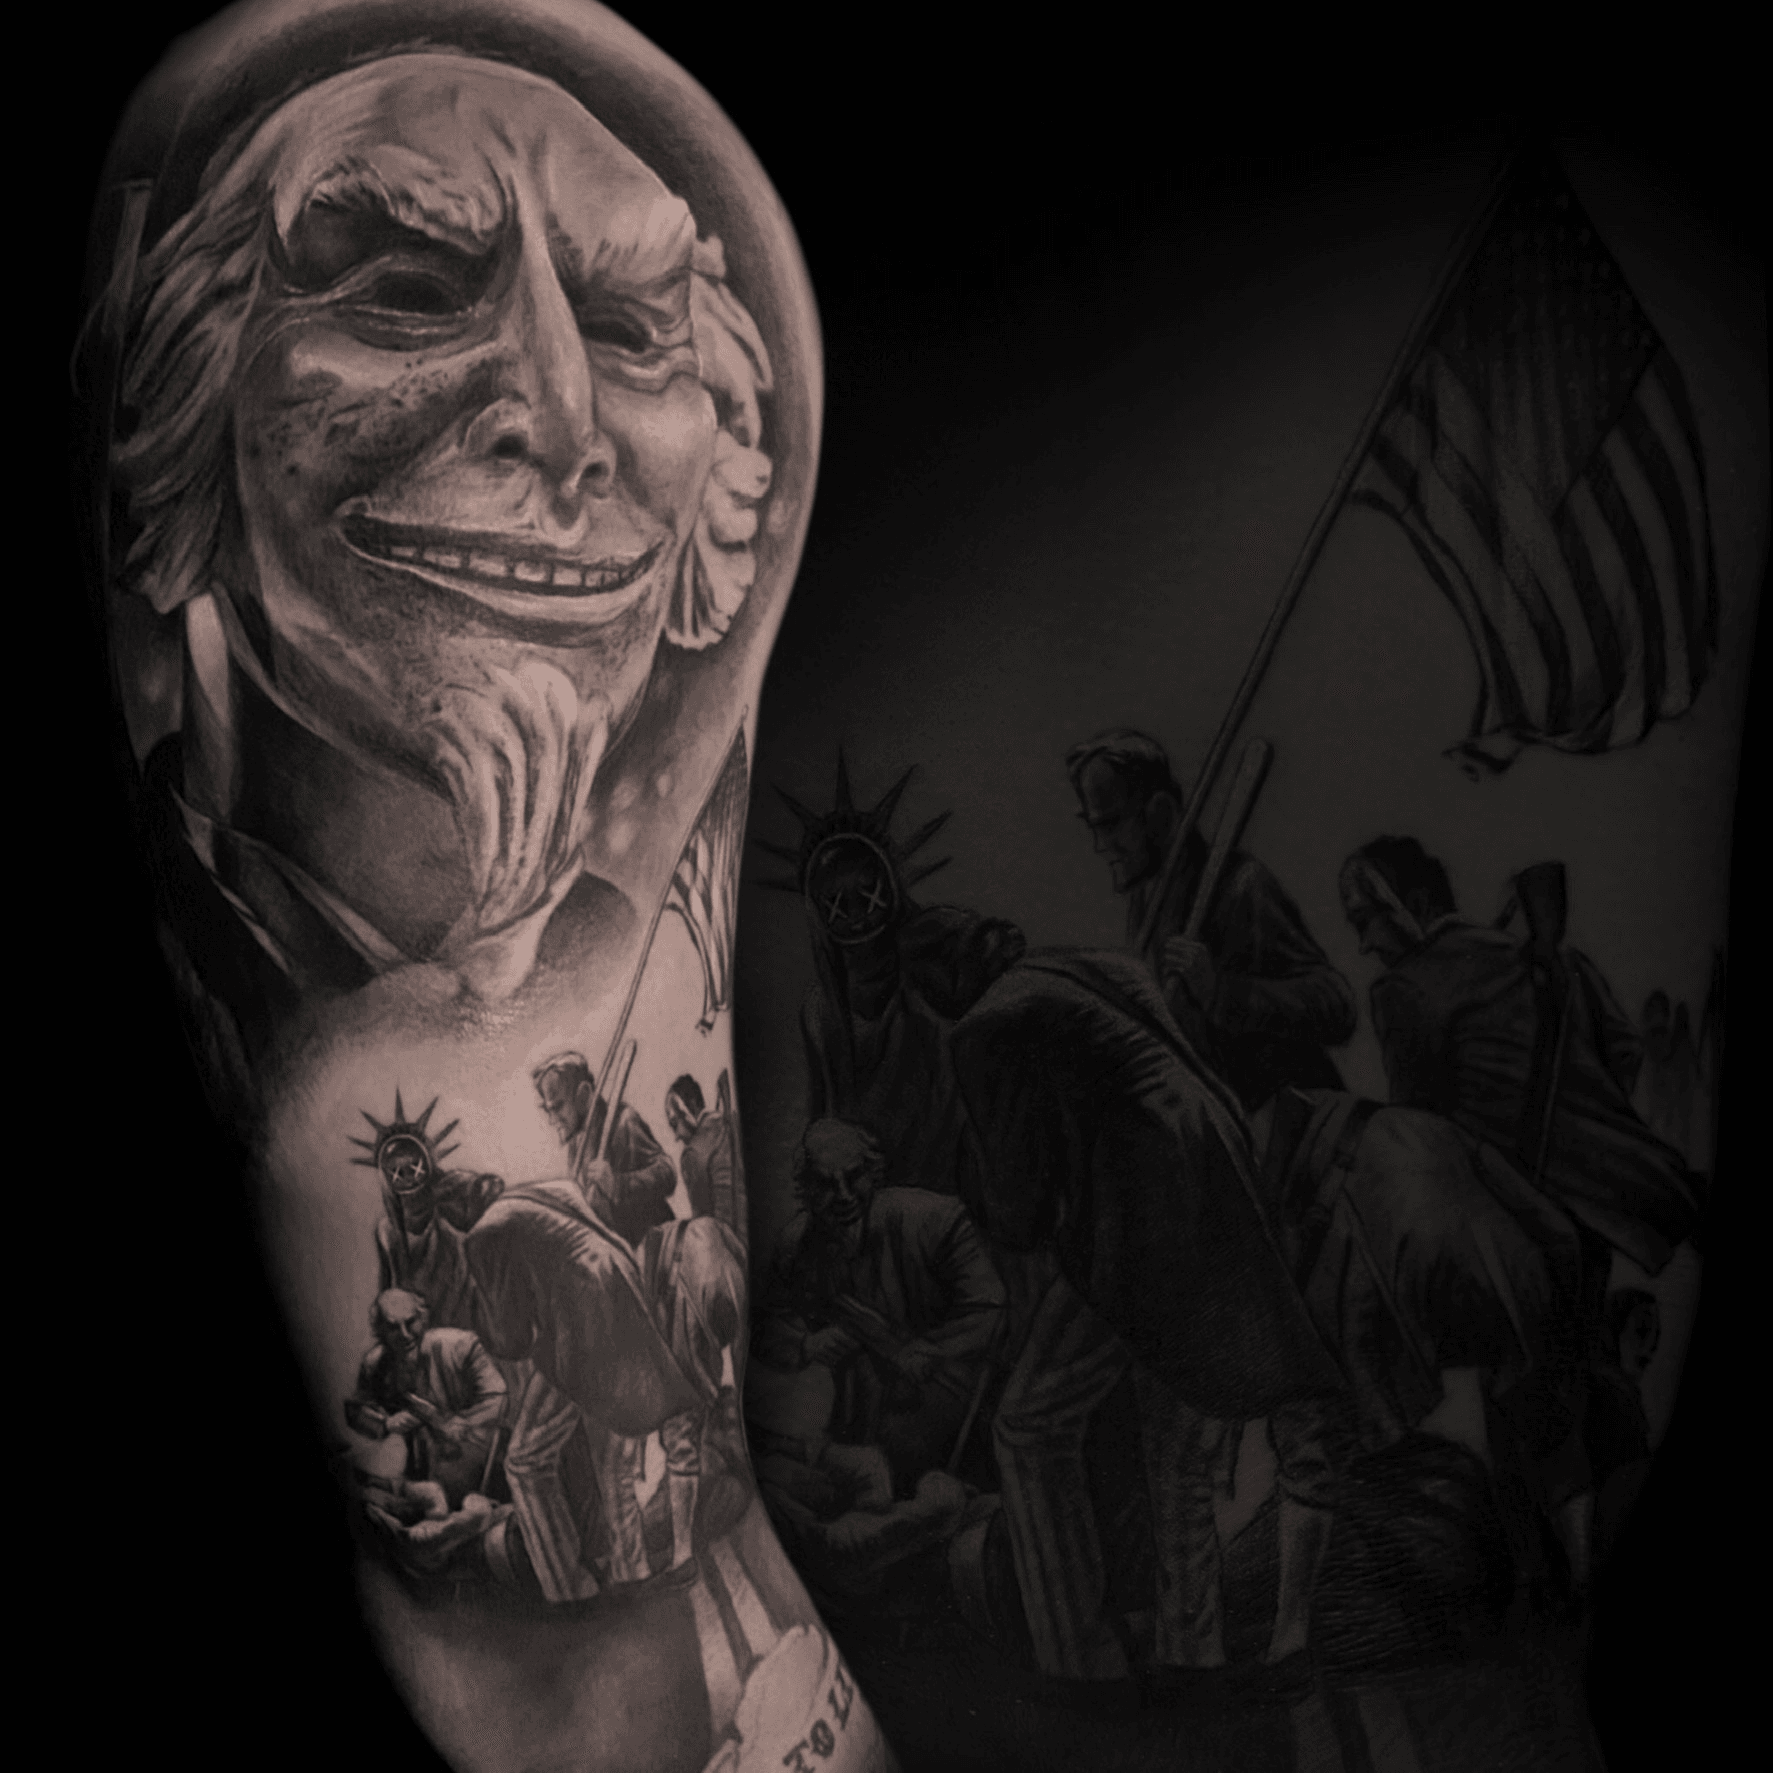 Bosske Tattoo  Do you also have your own purge mask tattooing tattooart  tattooartists tattos tattoo tattoed tattoorealistic tattoo2me  blackandgraytattoo blackandgrey realistic realistictattoo inkedmag  inkedup instadaily  Facebook